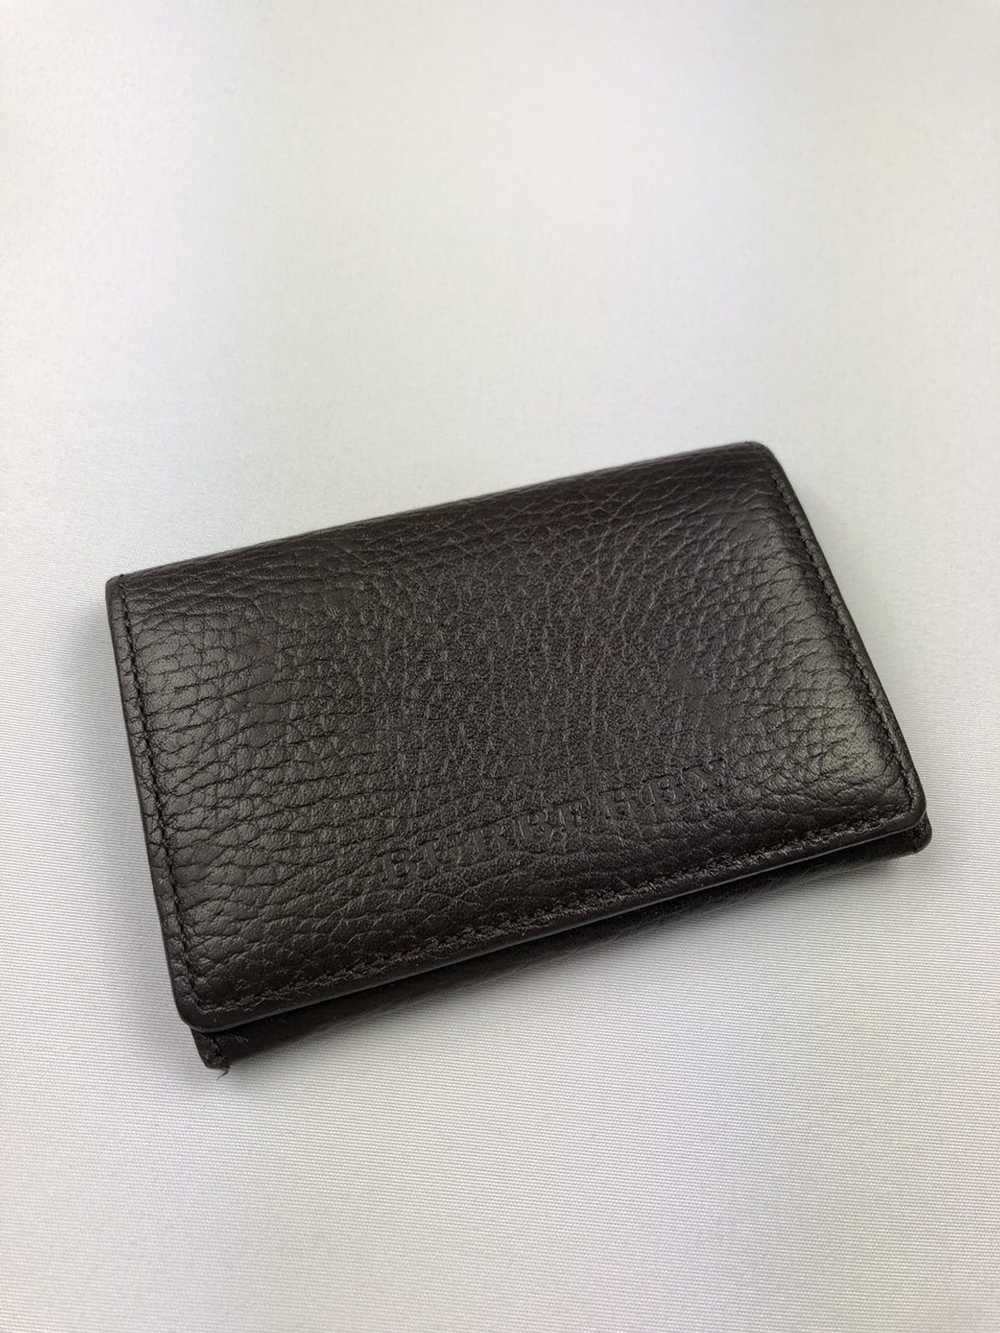 Buy [Used] Burberry Card Case Business Card Holder Leather Pass Case  Leather Black SI4708 from Japan - Buy authentic Plus exclusive items from  Japan